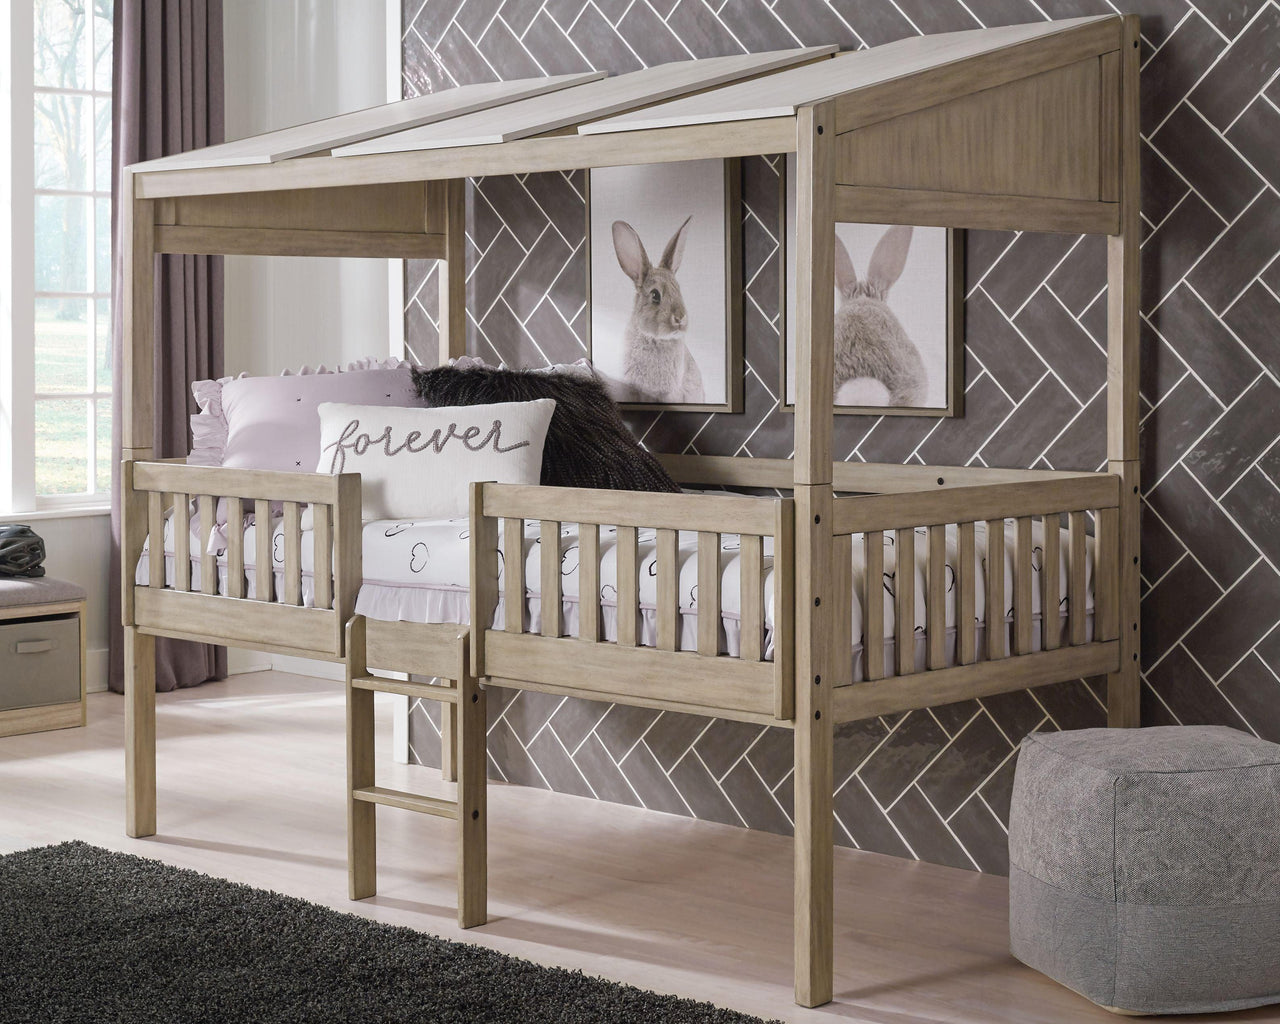 Wrenalyn - White / Brown / Beige - Twin Loft Bed With Roof Panels Tony's Home Furnishings Furniture. Beds. Dressers. Sofas.